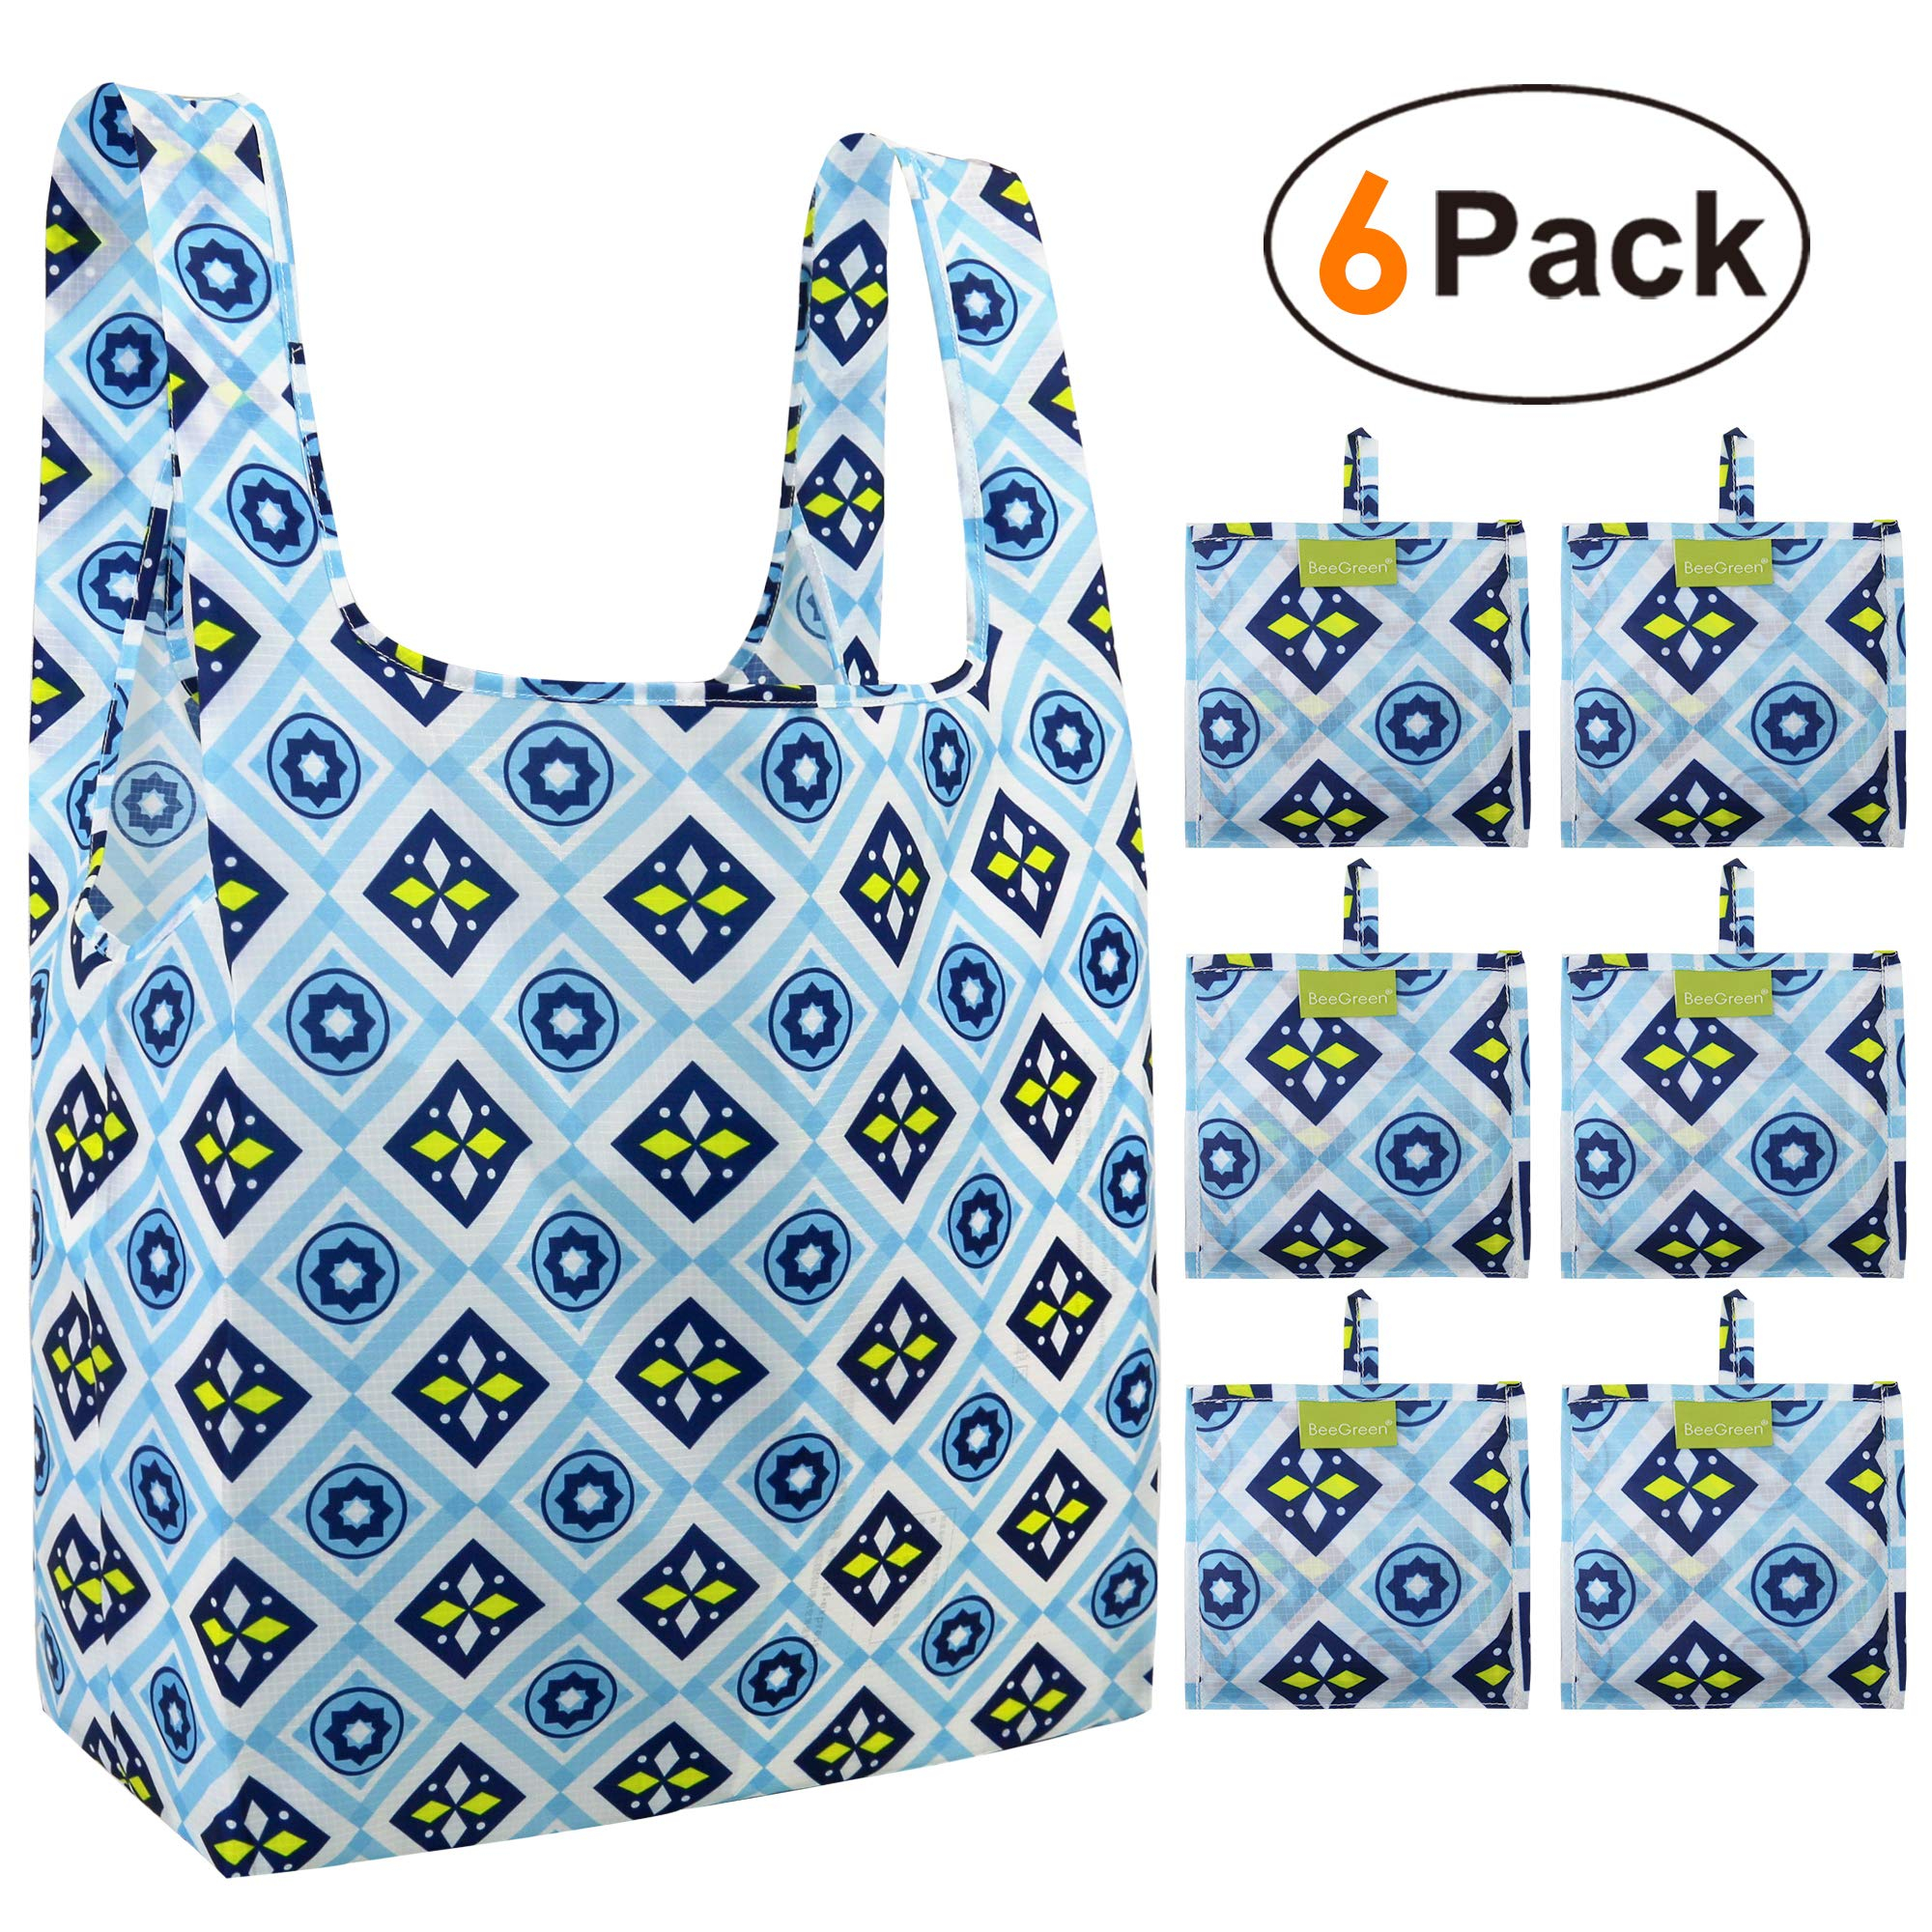 Reusable Grocery Bag Pattern Catalog Of Patterns